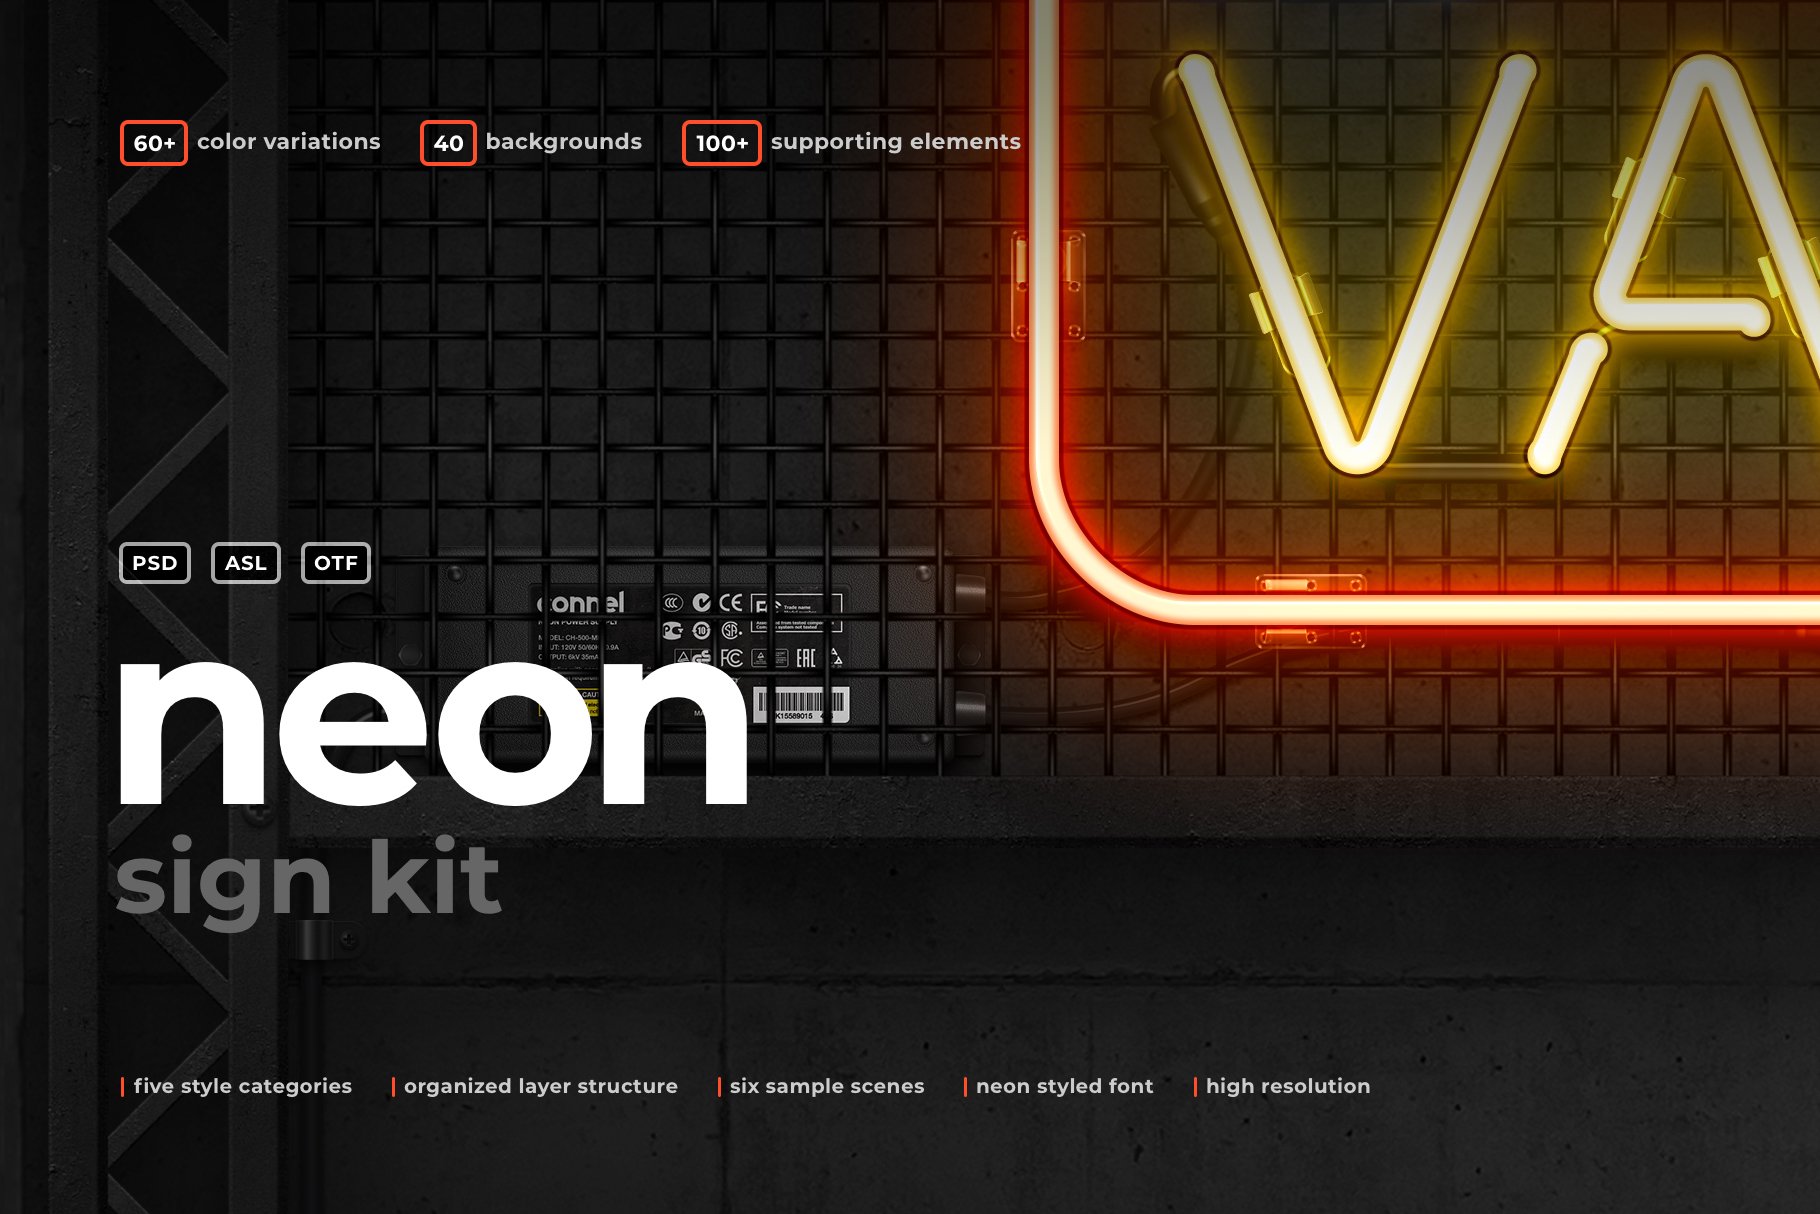 Neon Sign Kitcover image.